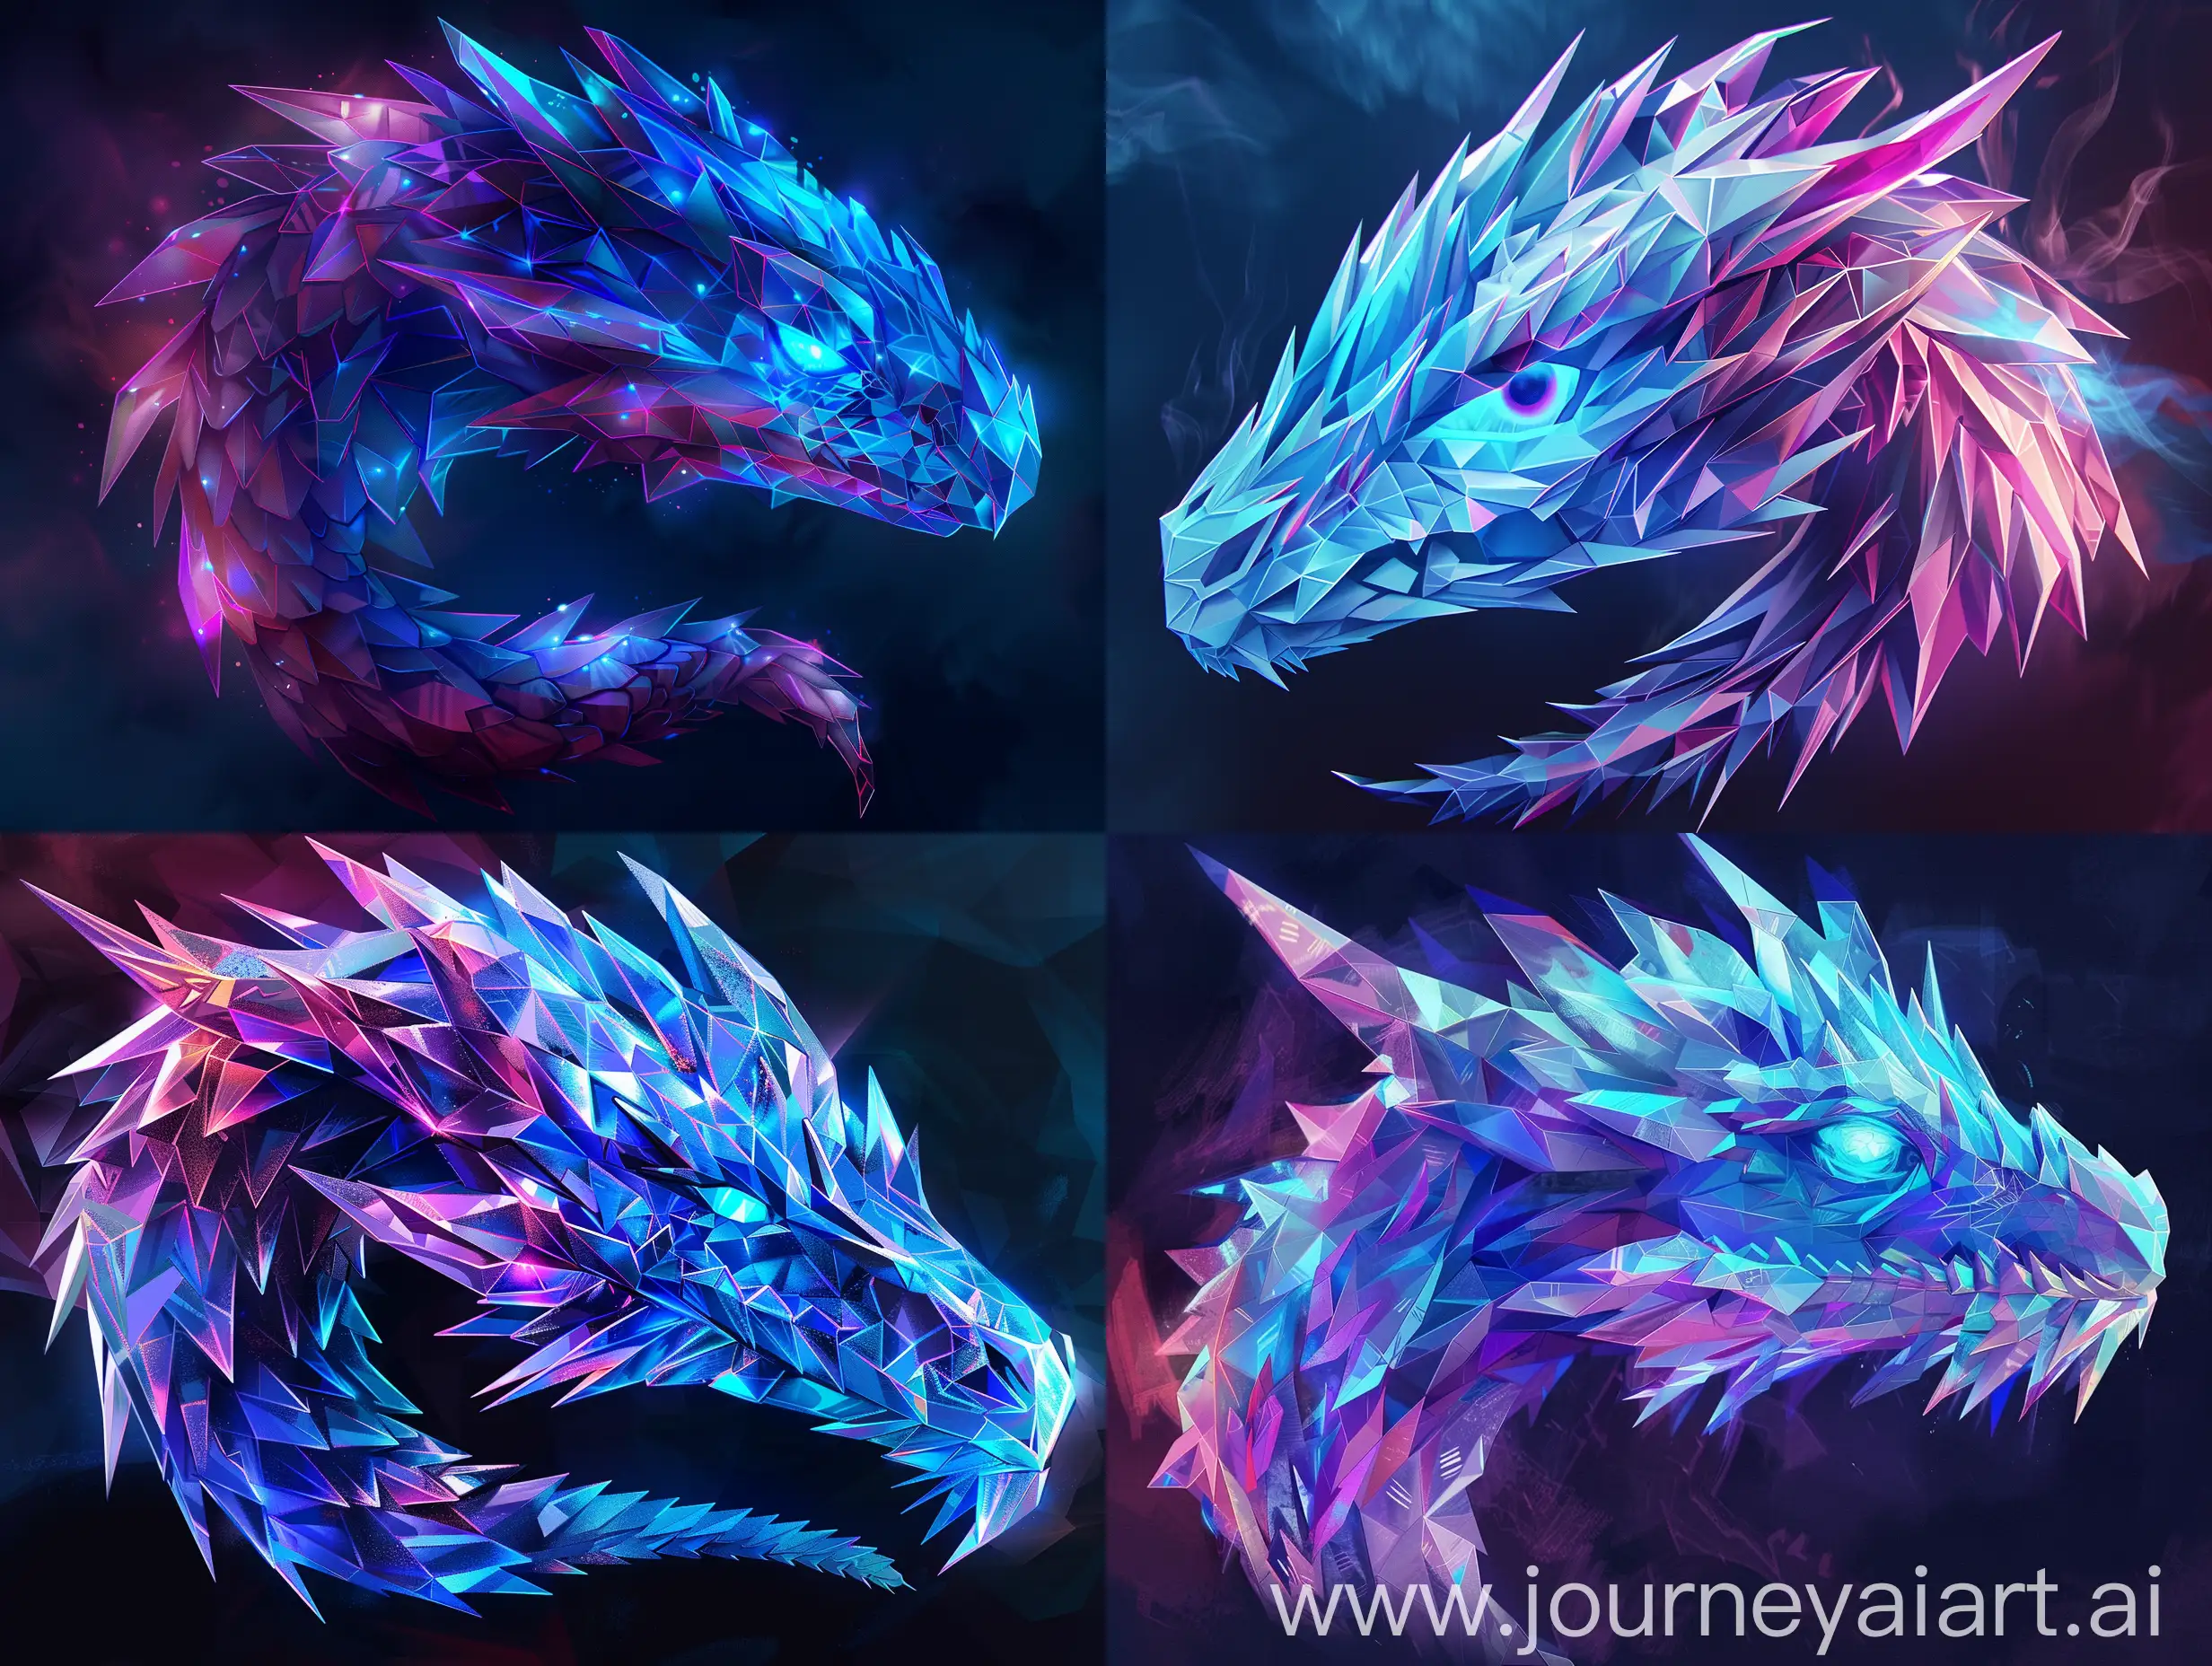 Generate a digital artwork of a dragon head in a low poly style, featuring sharp, angular facets. The dragon should appear majestic and ethereal, with a color palette that includes electric blues, vivid purples, and hot pinks. Highlight the dragon's eye with a luminous blue glow, set against a dark background to make the colors pop.